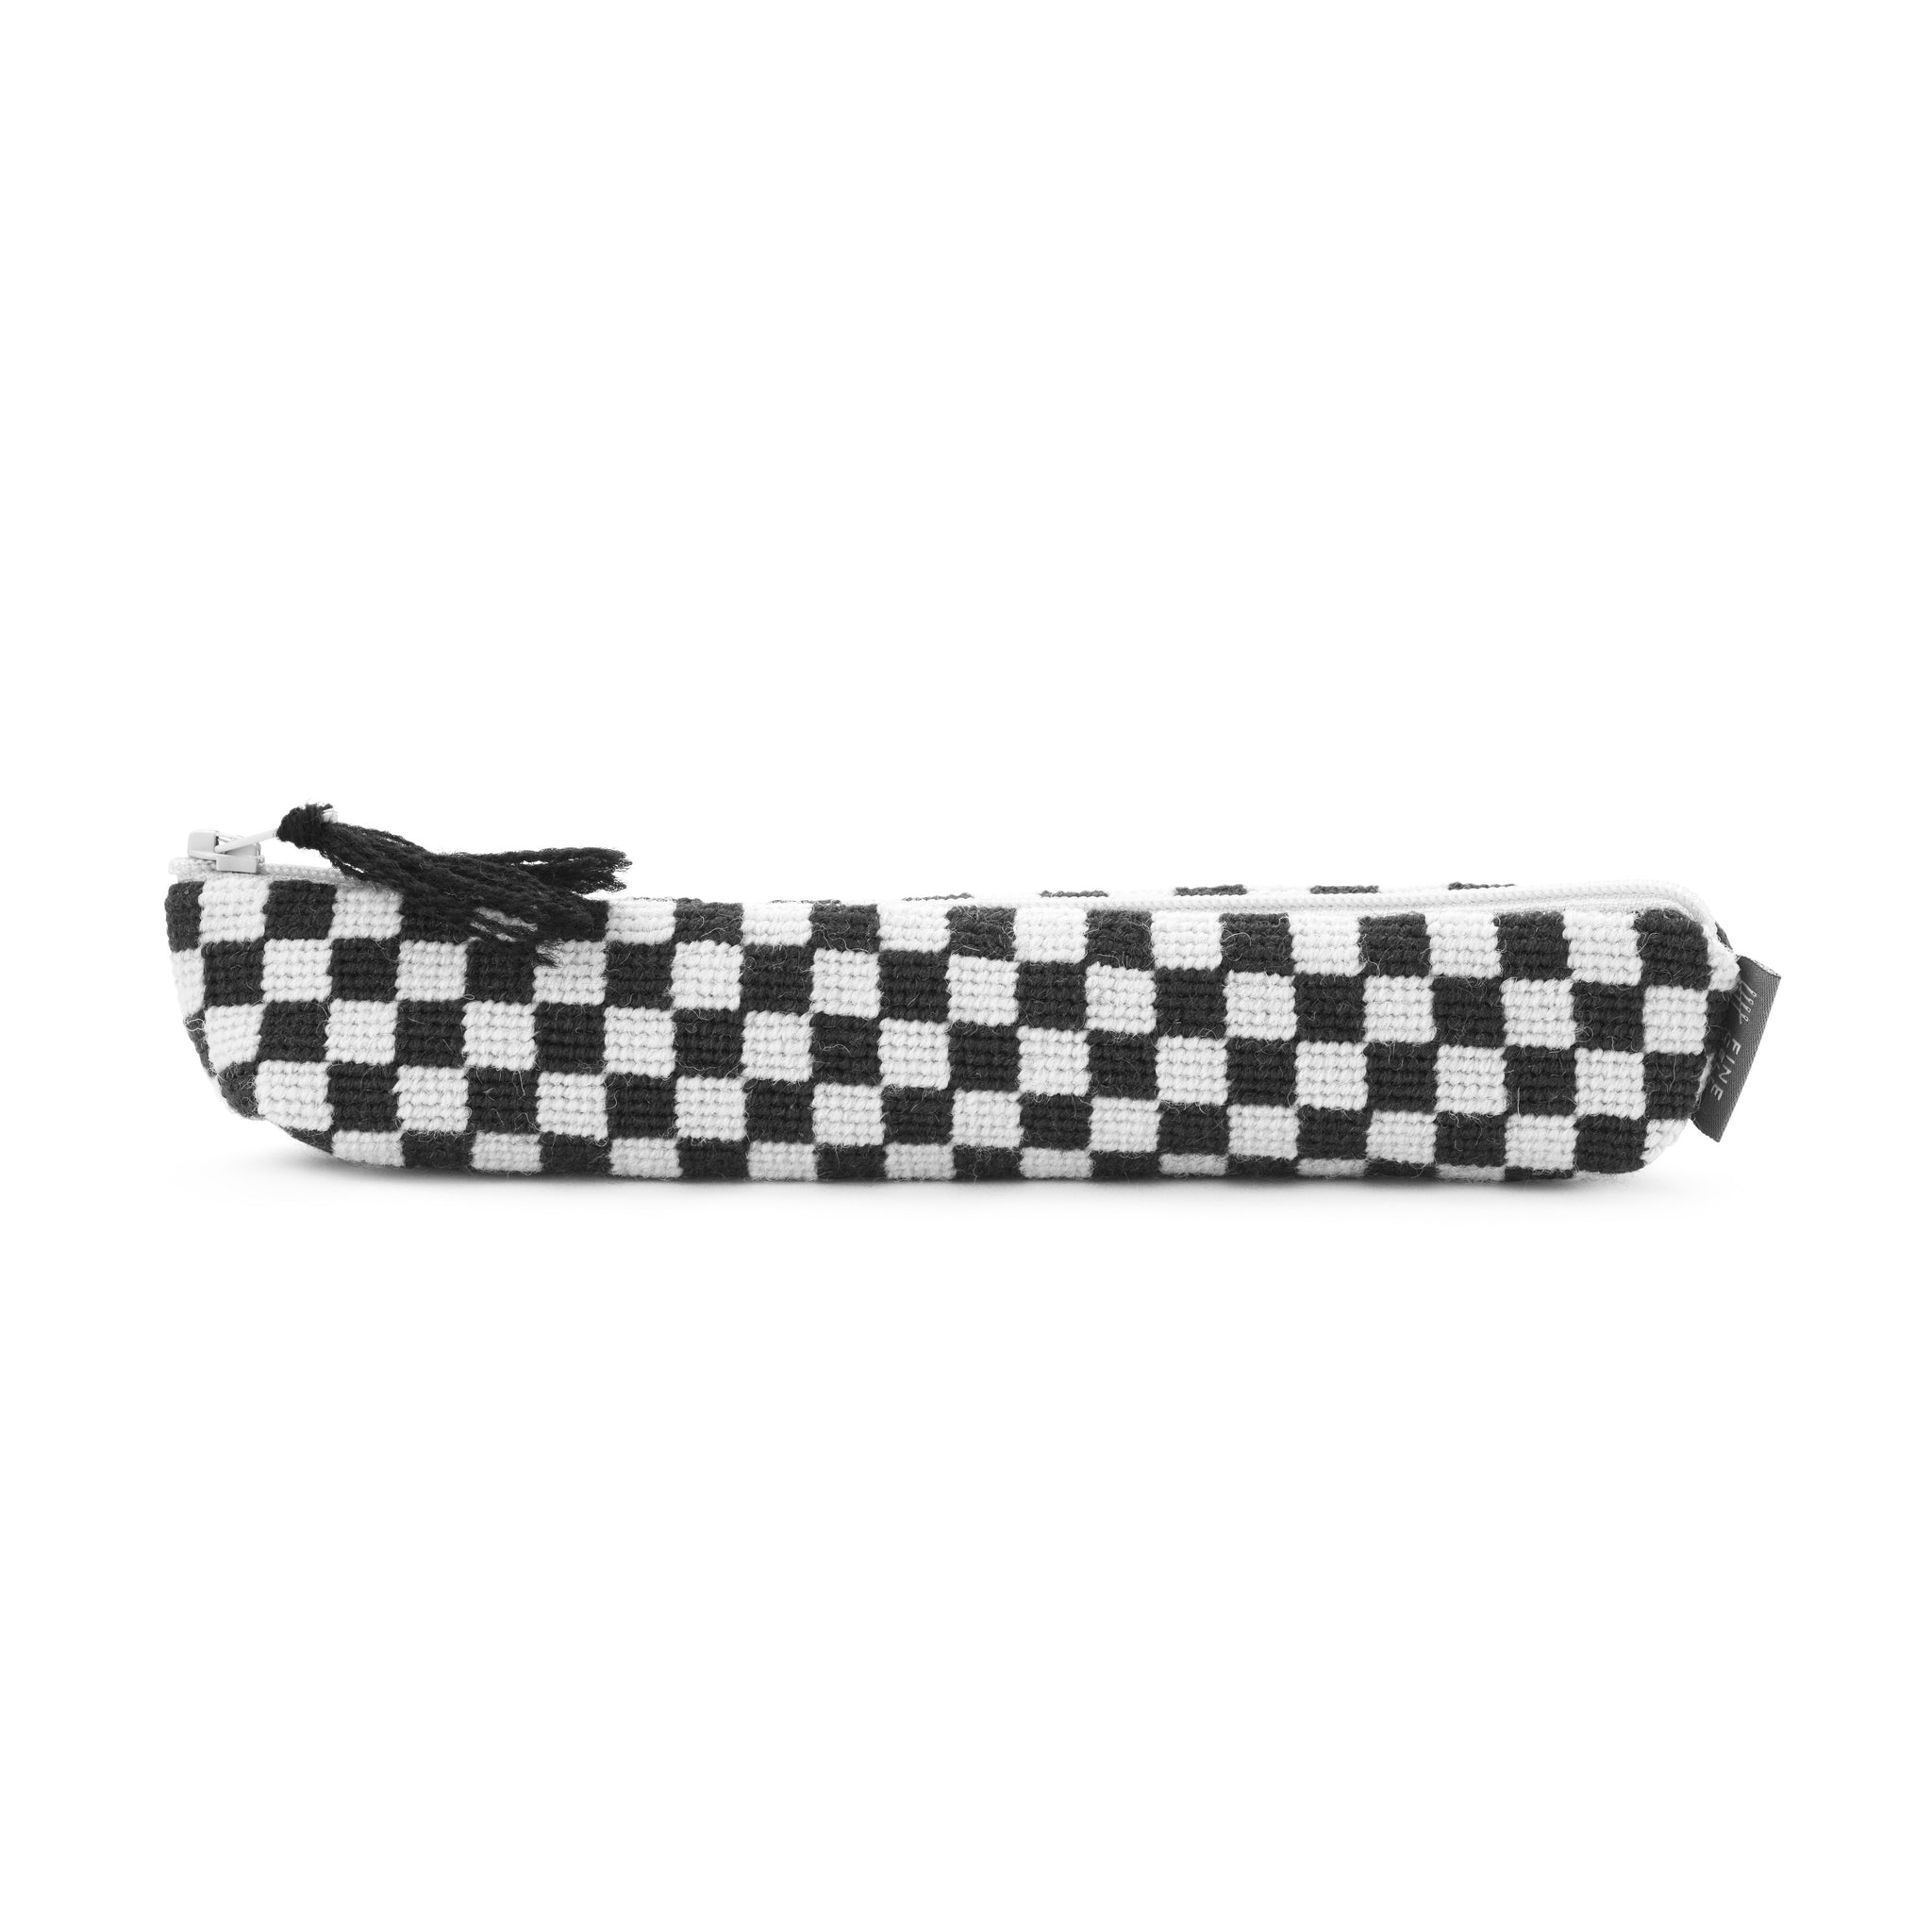 Silverstone Chequerboard Needlepoint Pencil Case Black and White Cath Kidston for Fine Cell Work